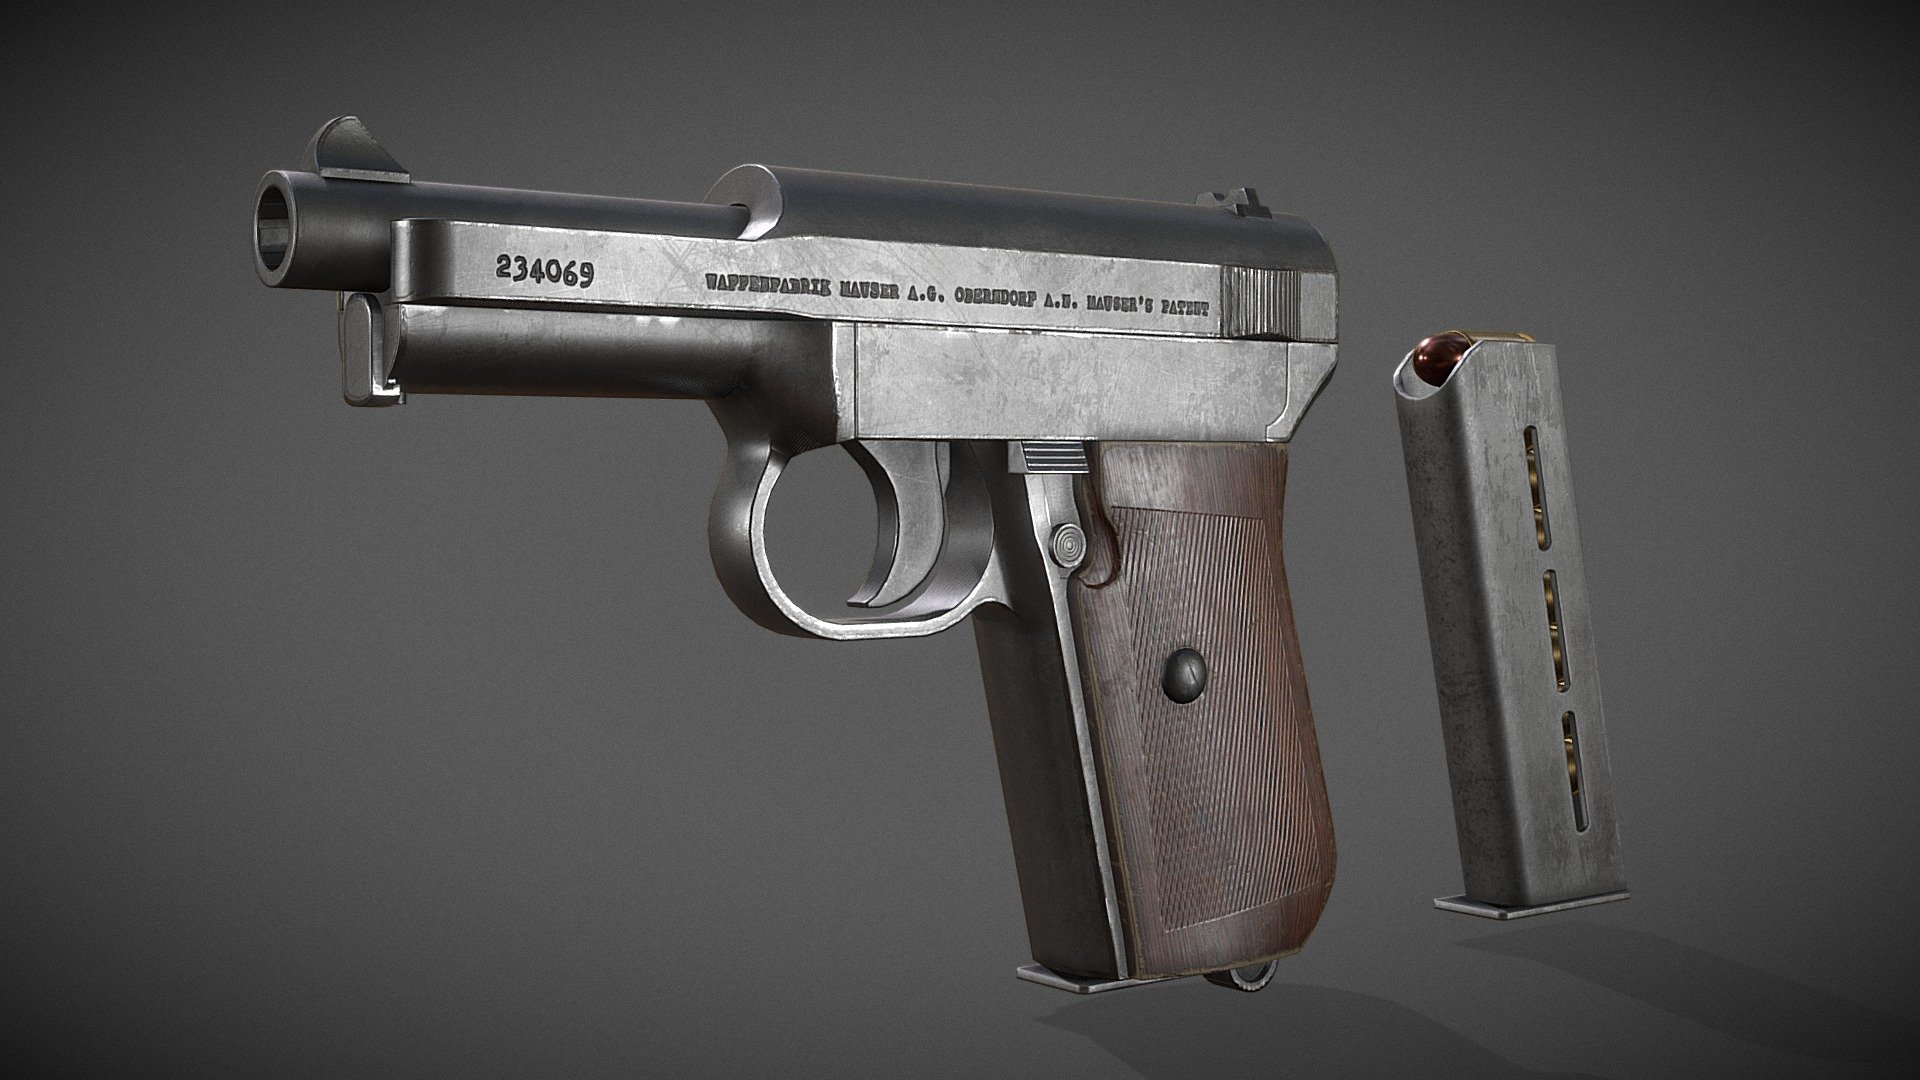 Mauser Model 1914, a vintage WW1 era semi-automatic handgun used by the German Empire. It's chambered in the 7.65 mm Browning Short (or .32 ACP) cartridge.

I made this in about 5 days, completely smashing it out during the weekend. Proportions may not be 100%, since I only have 2D reference images to model from.


Modelled in Blender, textured in Substance Painter.
Materials in 4K PNG PBR (2k for the bullet)
Normal map: OpenGL

Artstation: https://www.artstation.com/artwork/vJKZYY - Mauser 1914 - Download Free 3D model by 8sianDude (@haoliu95) 3d model